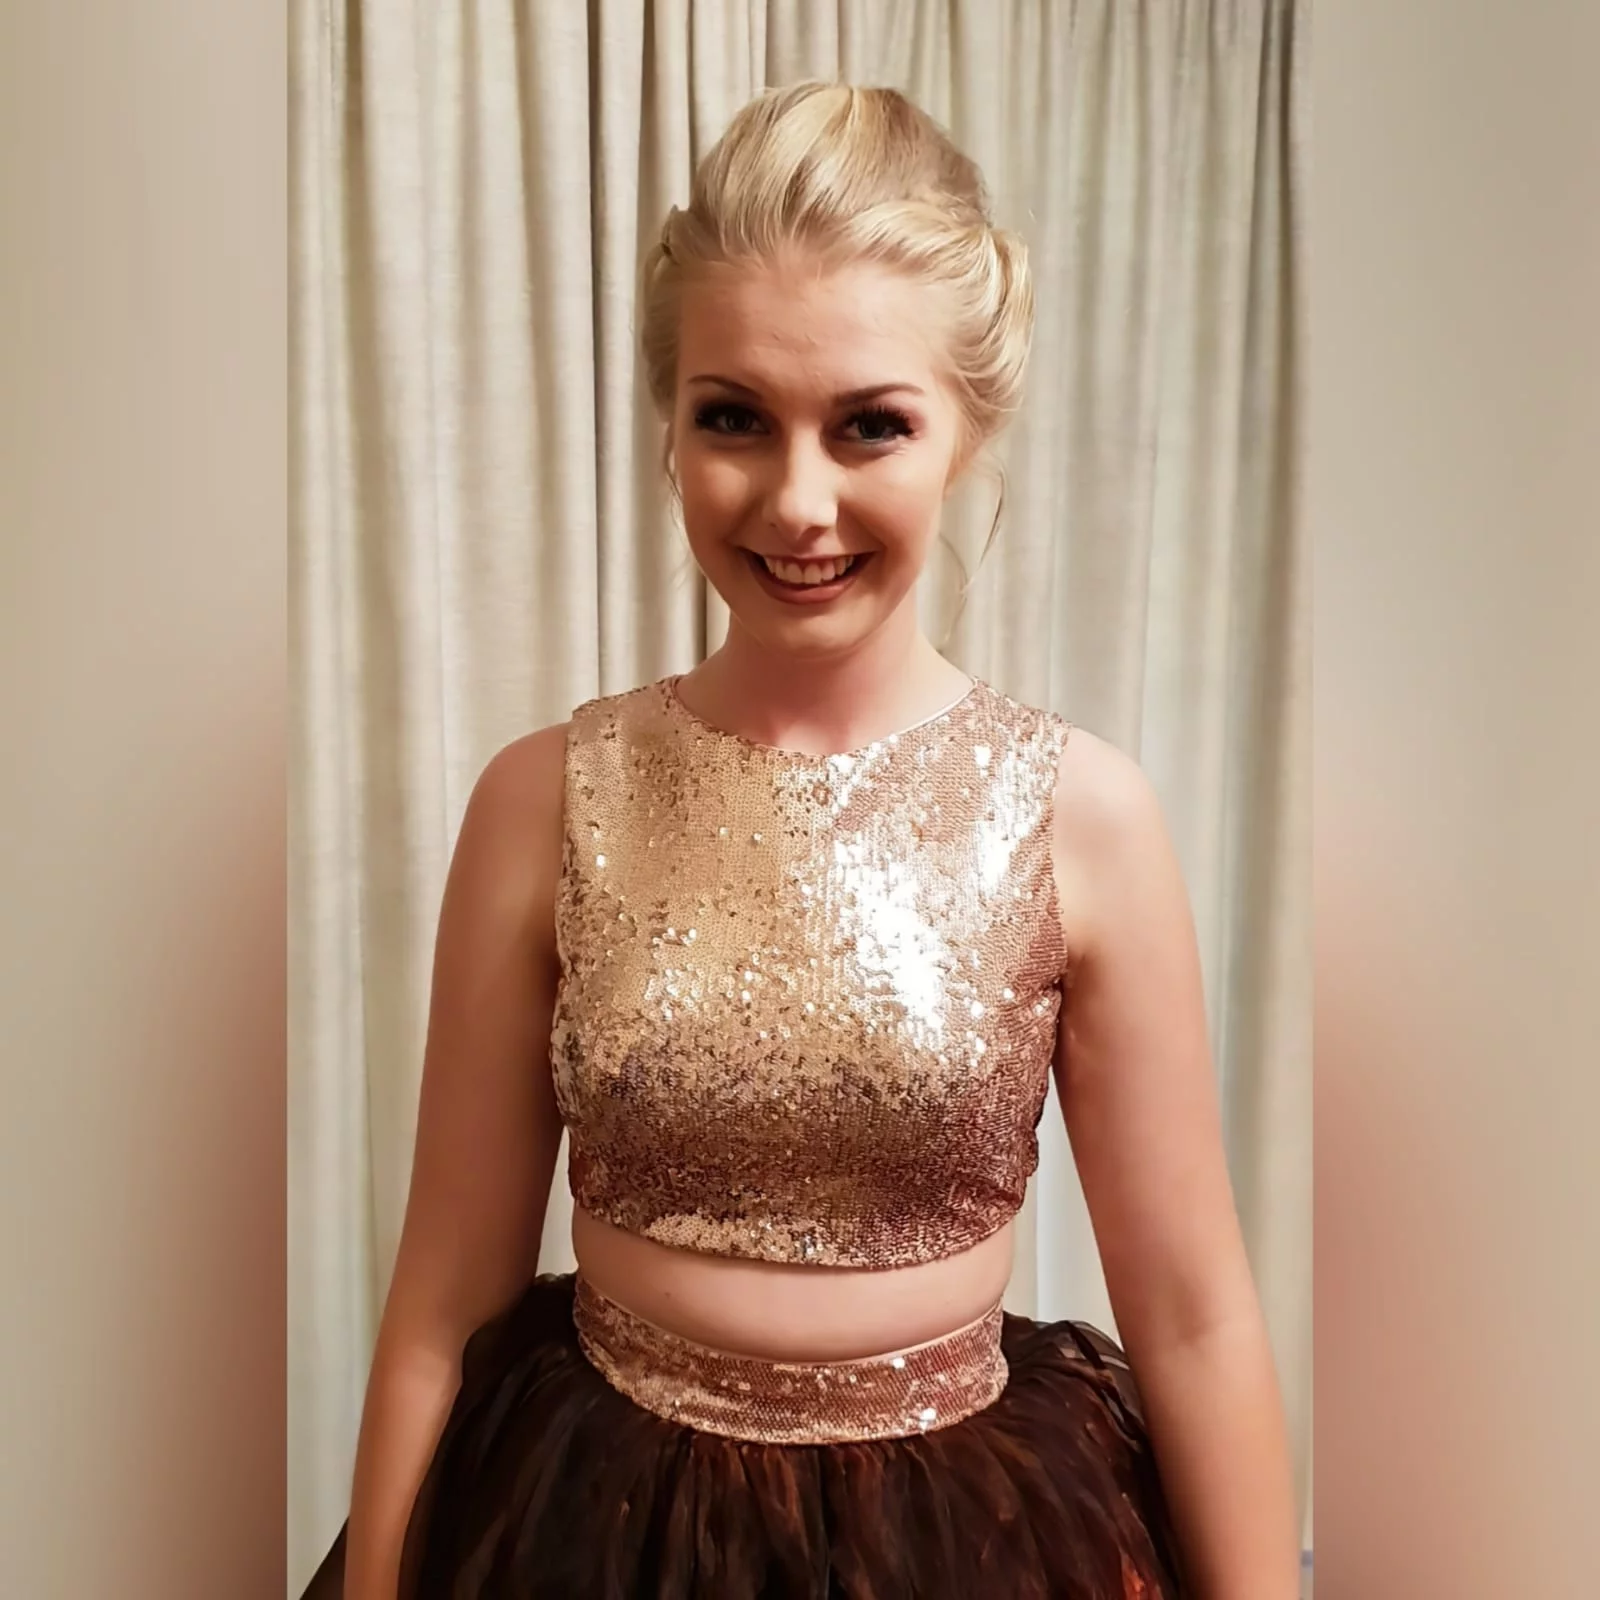 2 piece brown and rose gold matric farewell dress 5 this awesome versatile evening dress was created for a matric farewell dance. 2 piece brown and rose gold prom dress. With a layered organza full skirt and sequins waistband. Crop top in rosegold sequins which can be reused in several other occasions